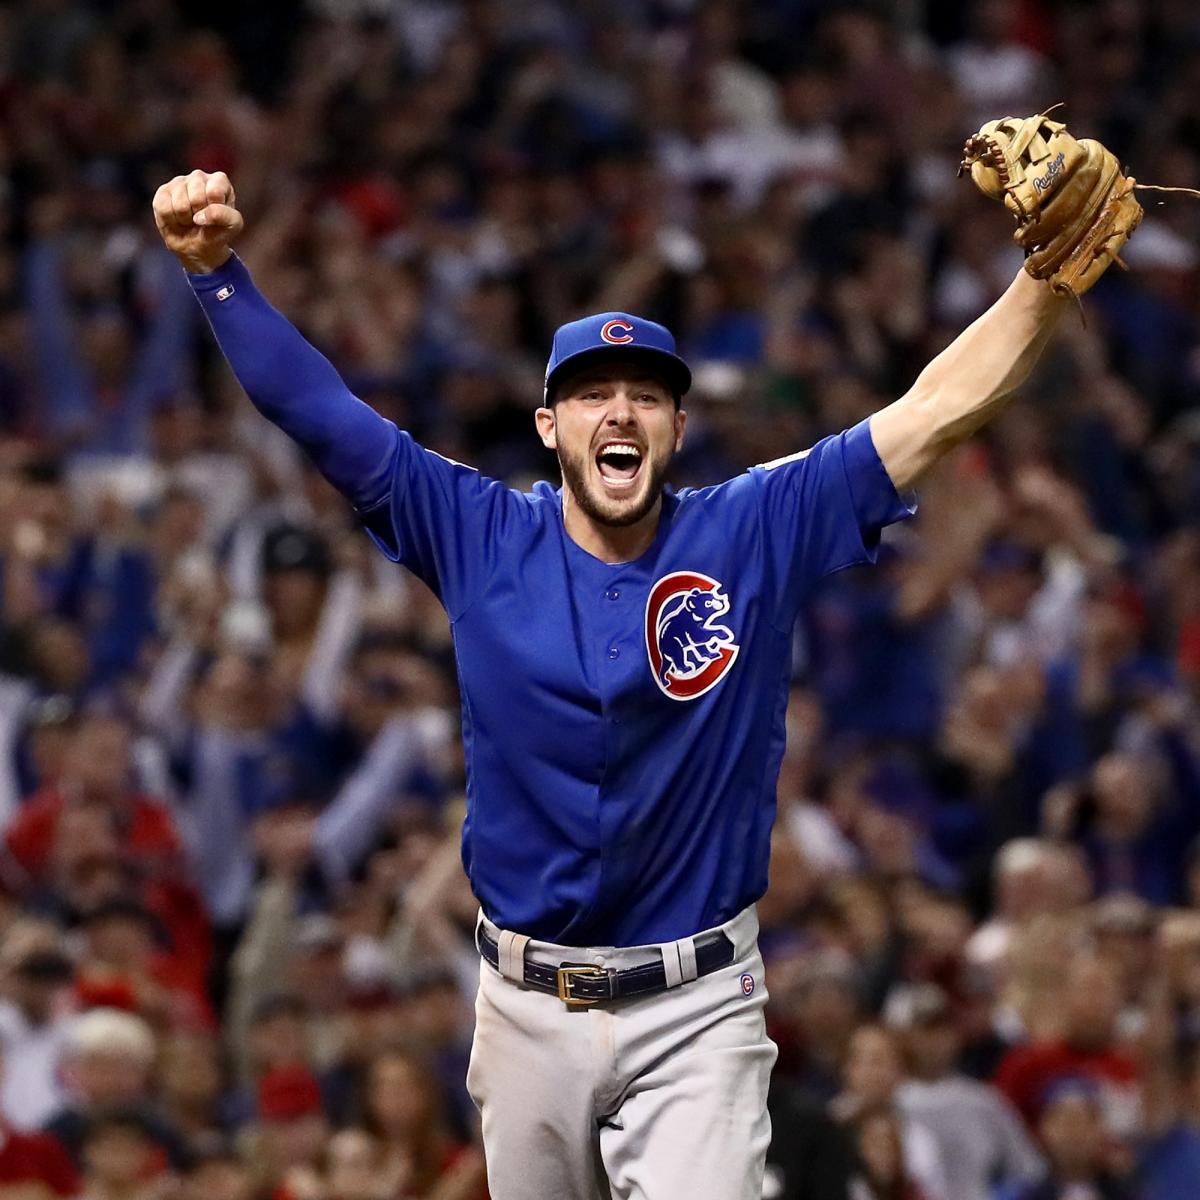 Kris Bryant Got Married: The Bachelor Market In Chicago Lost Some Sparkles  - Bleed Cubbie Blue